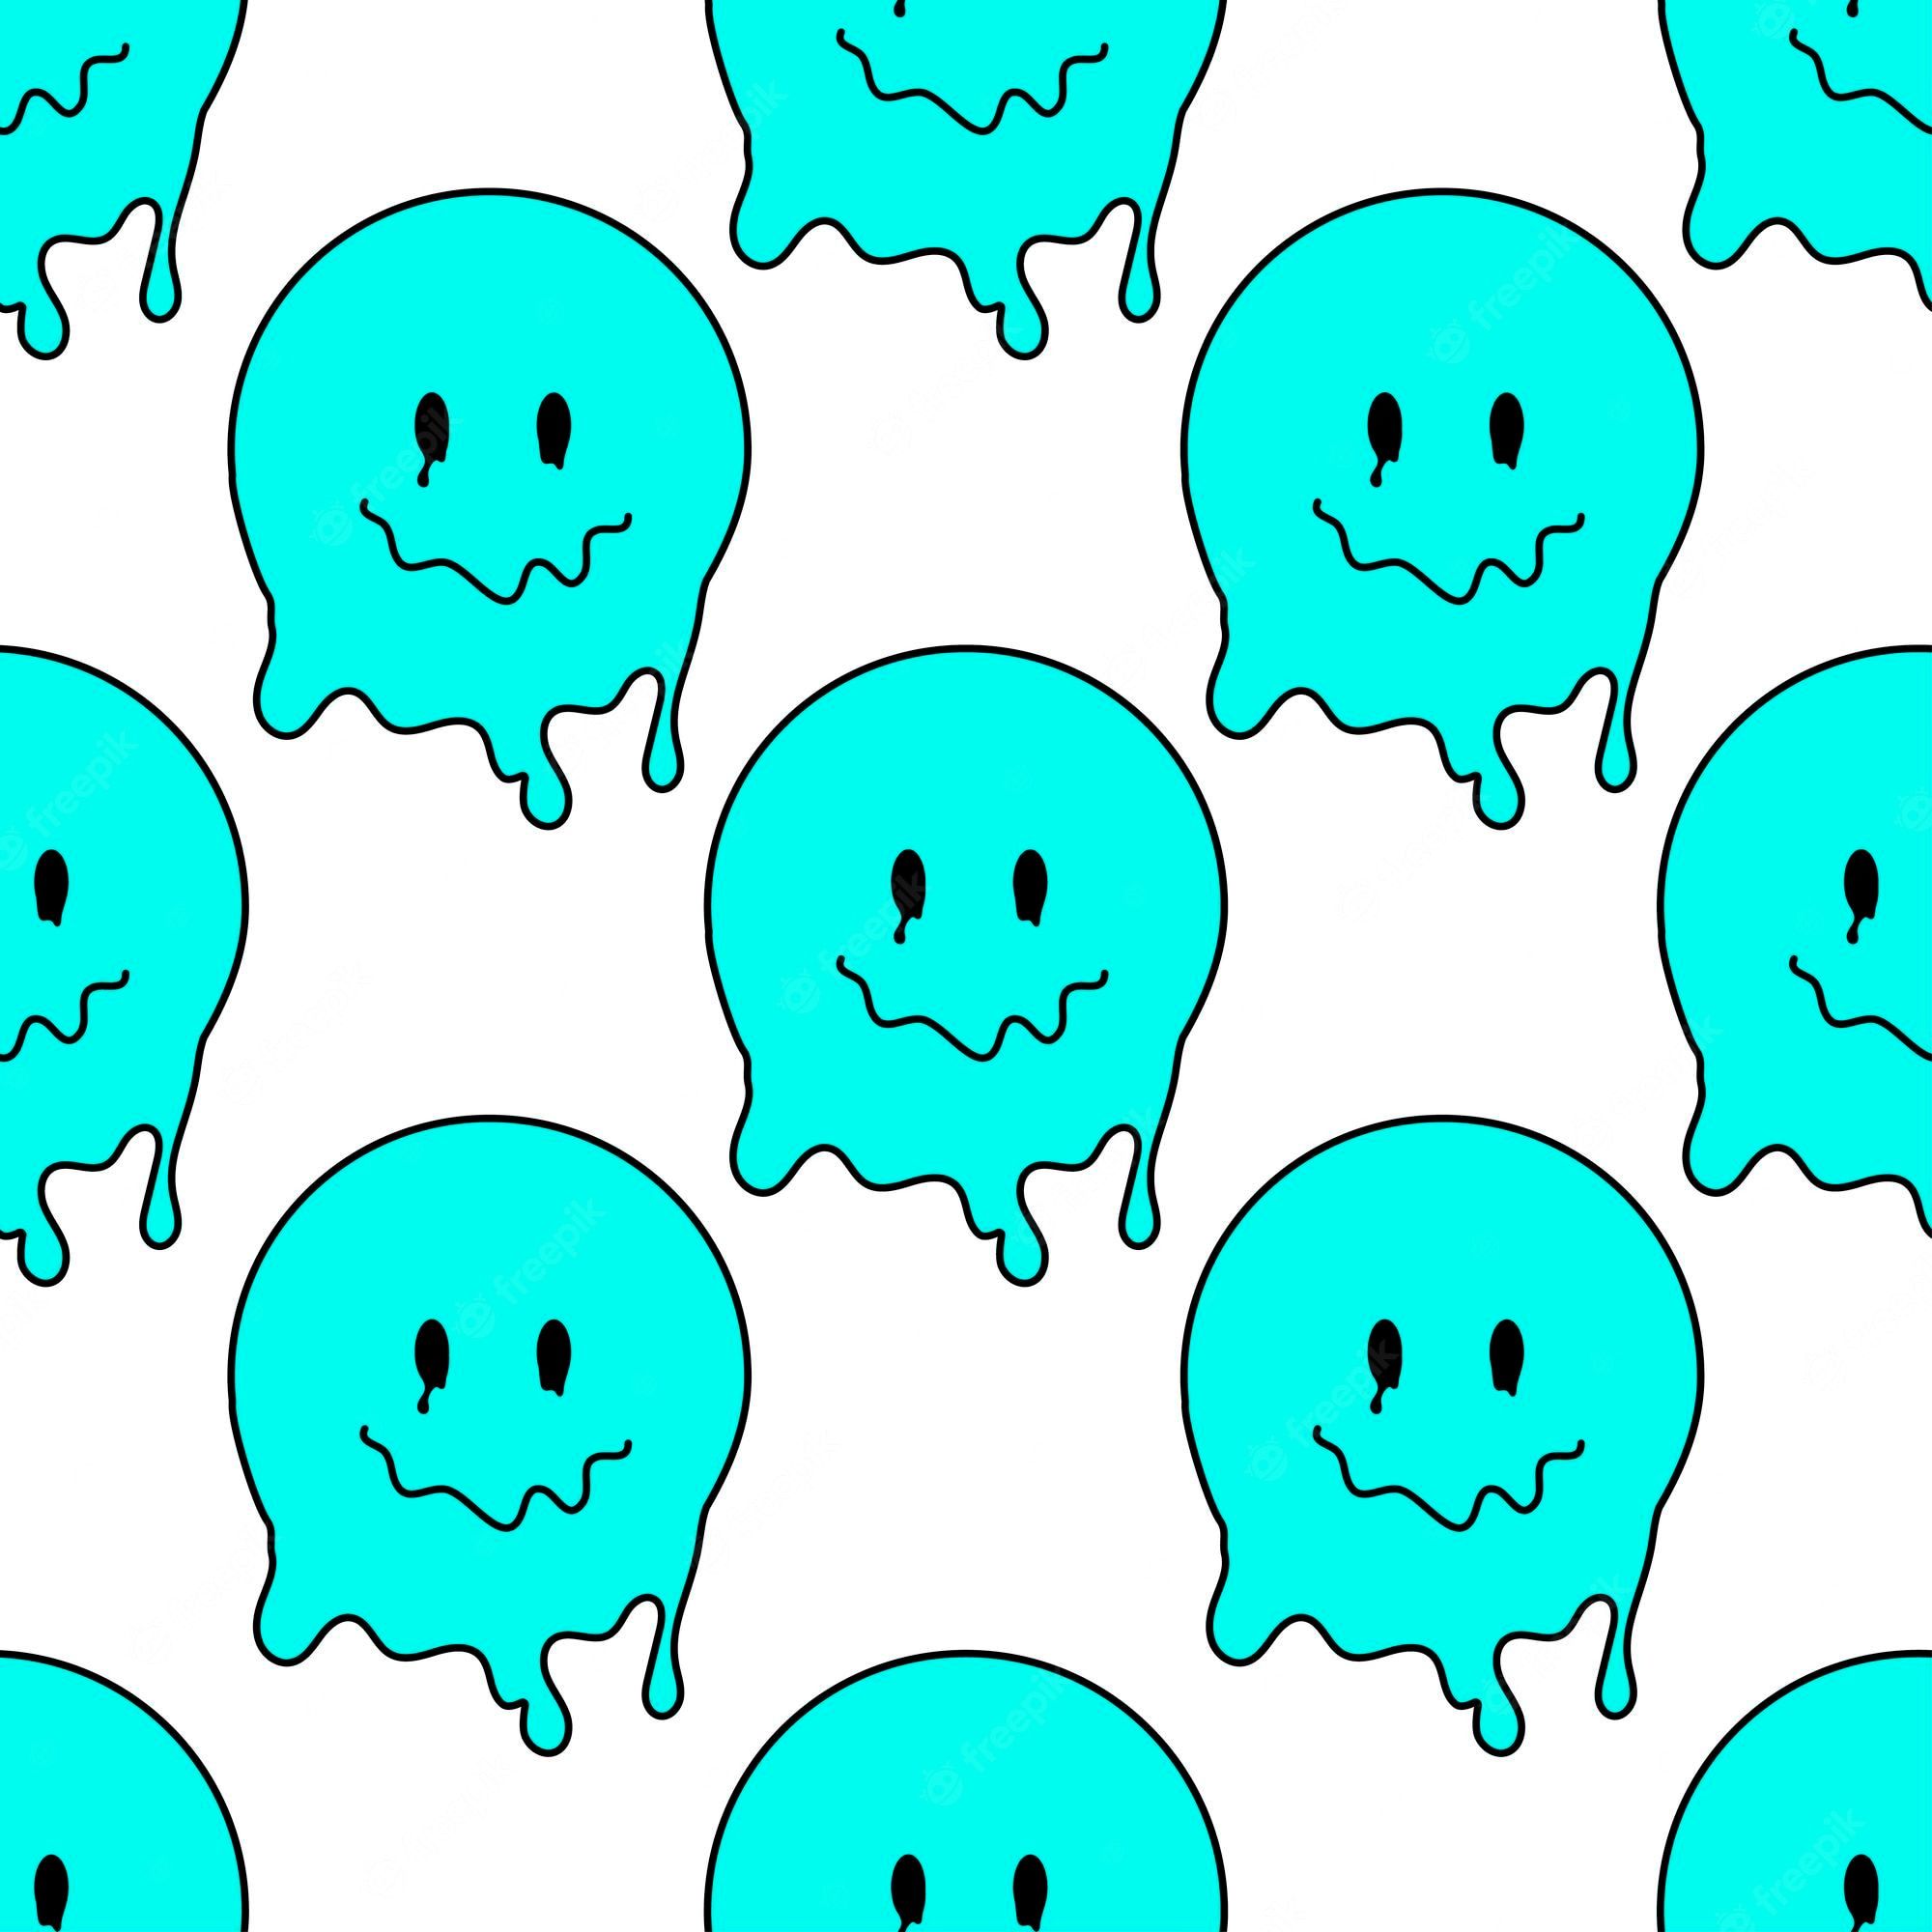 A pattern of smiling faces with dripping, melted edges - Funny, smile